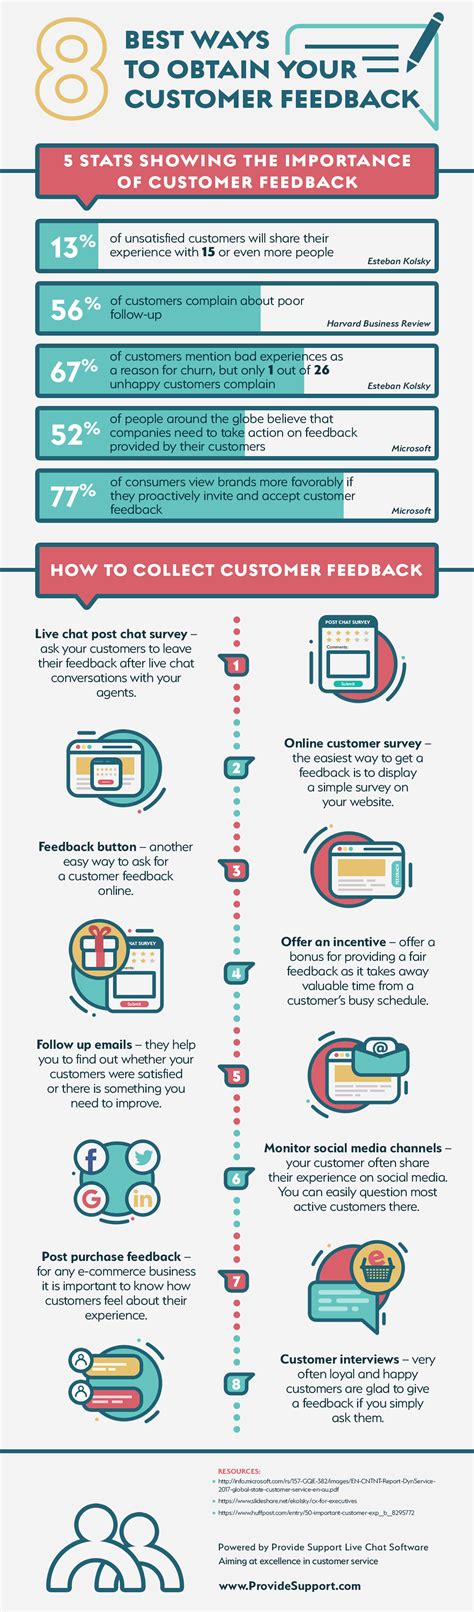 8 Smart Ways To Collect Customer Feedback Infographic